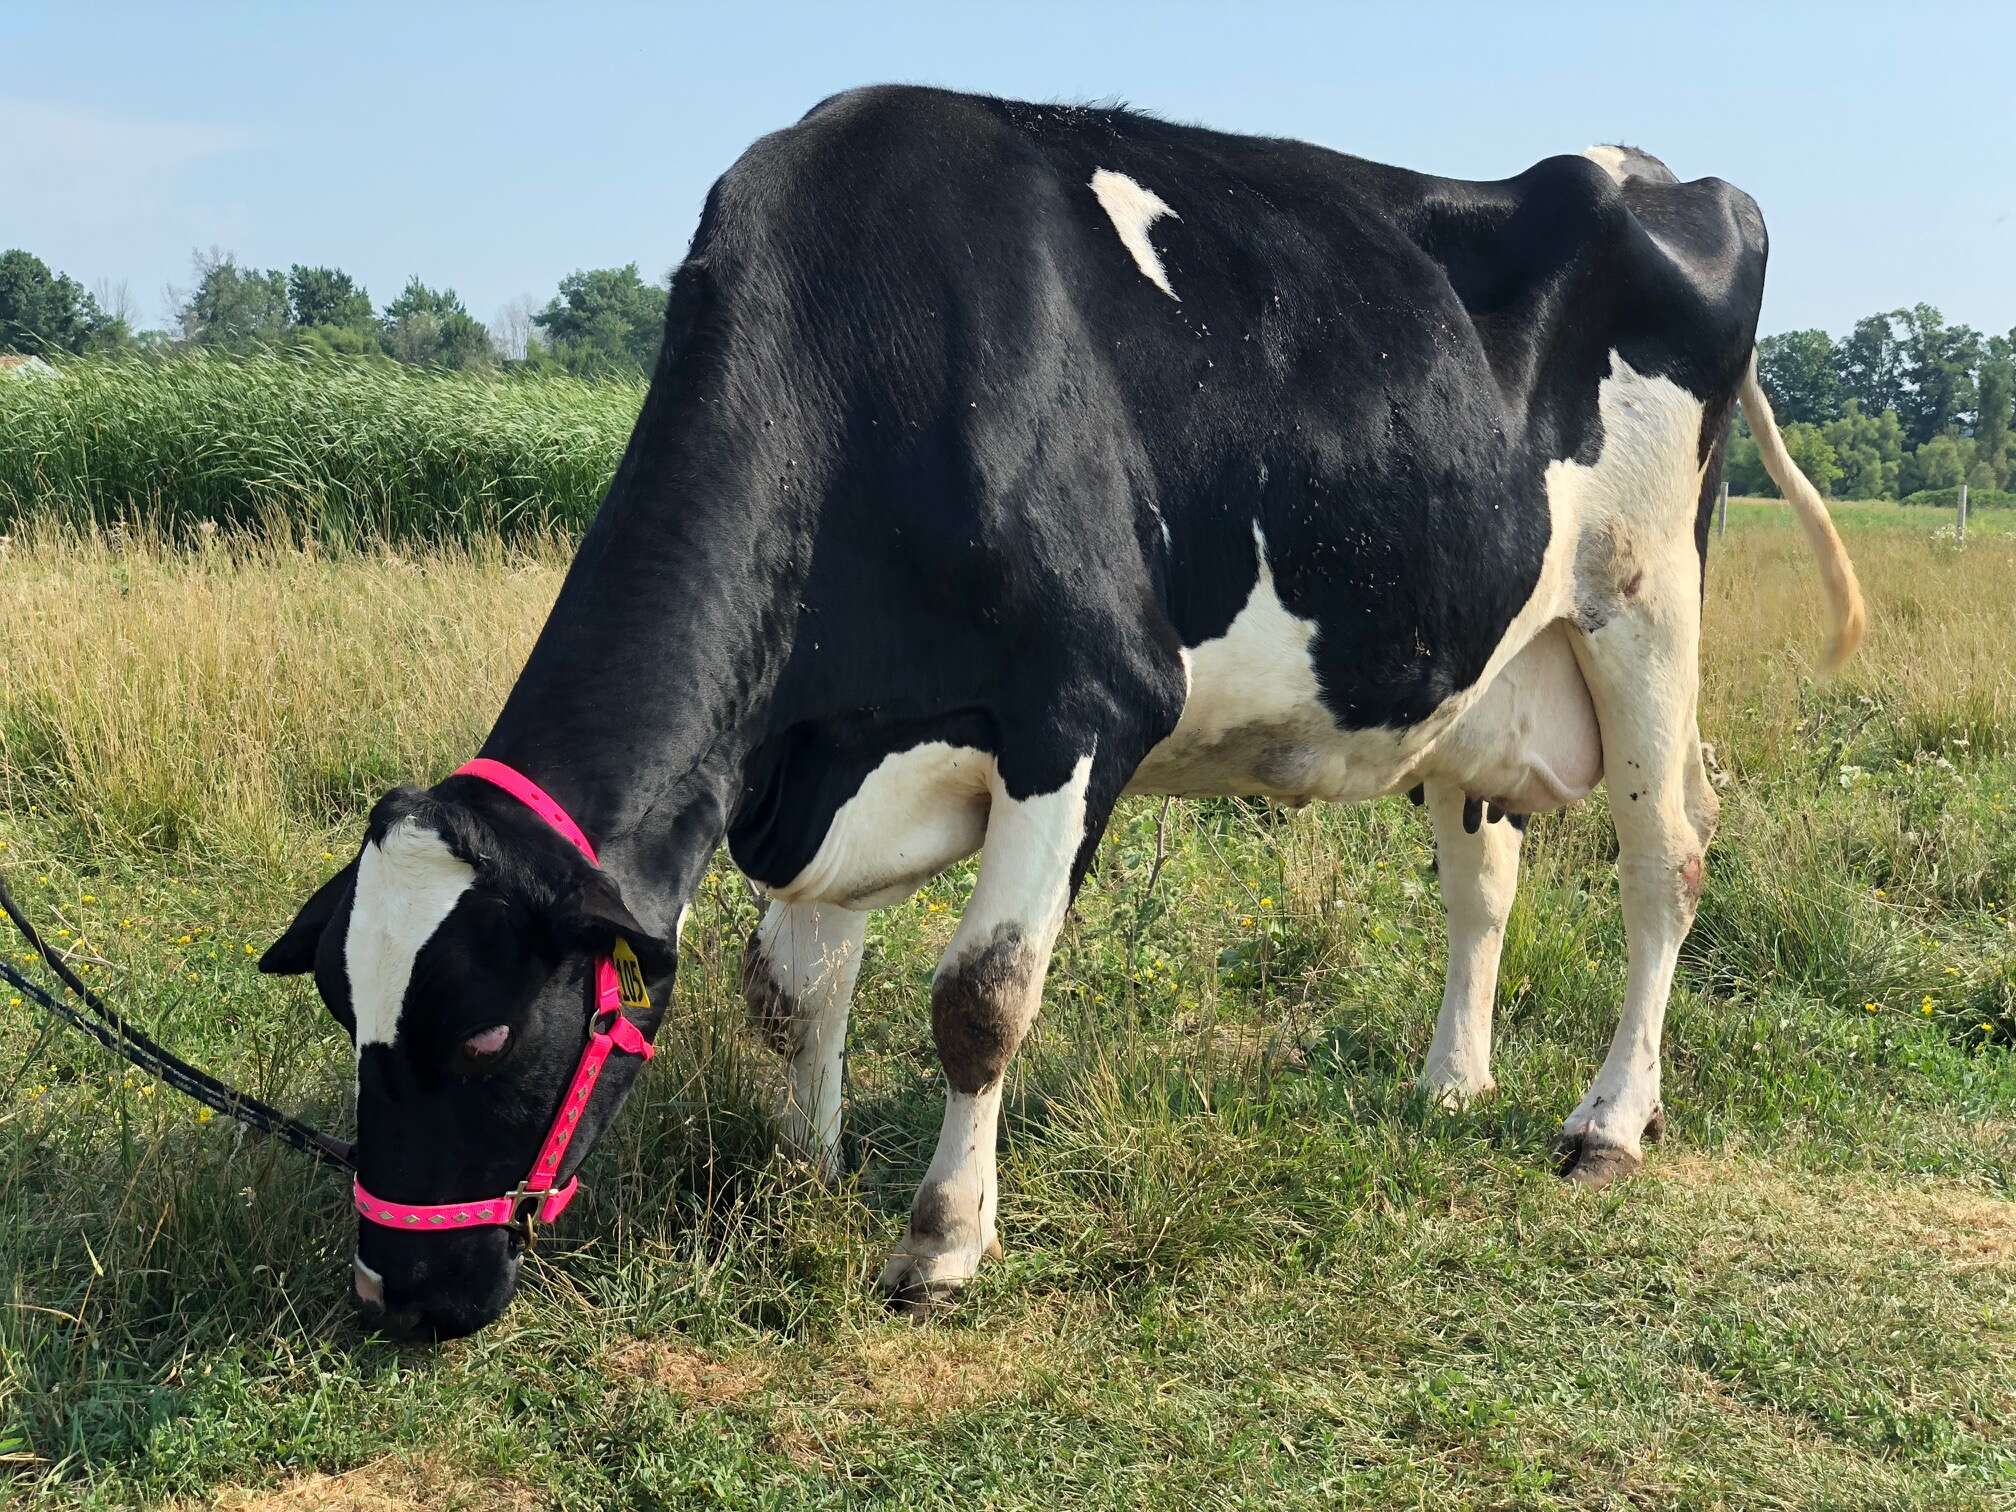 Blind cow saved from dairy farm